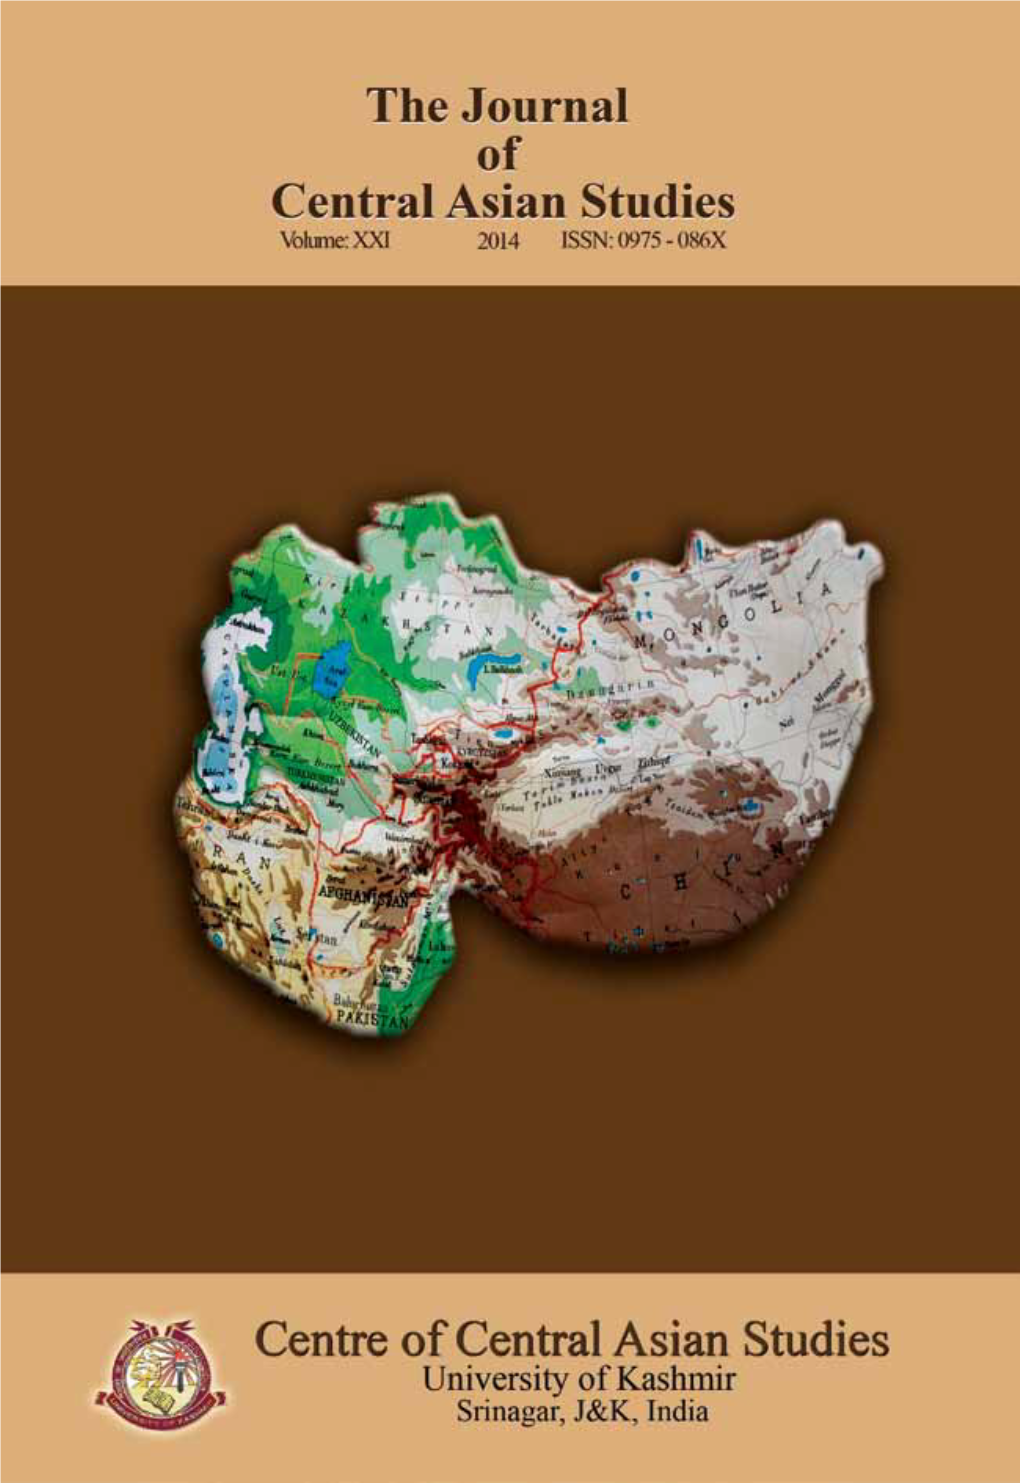 THE JOURNAL of CENTRAL ASIAN STUDIES Volume: XXI 2014 ISSN: 0975-086X